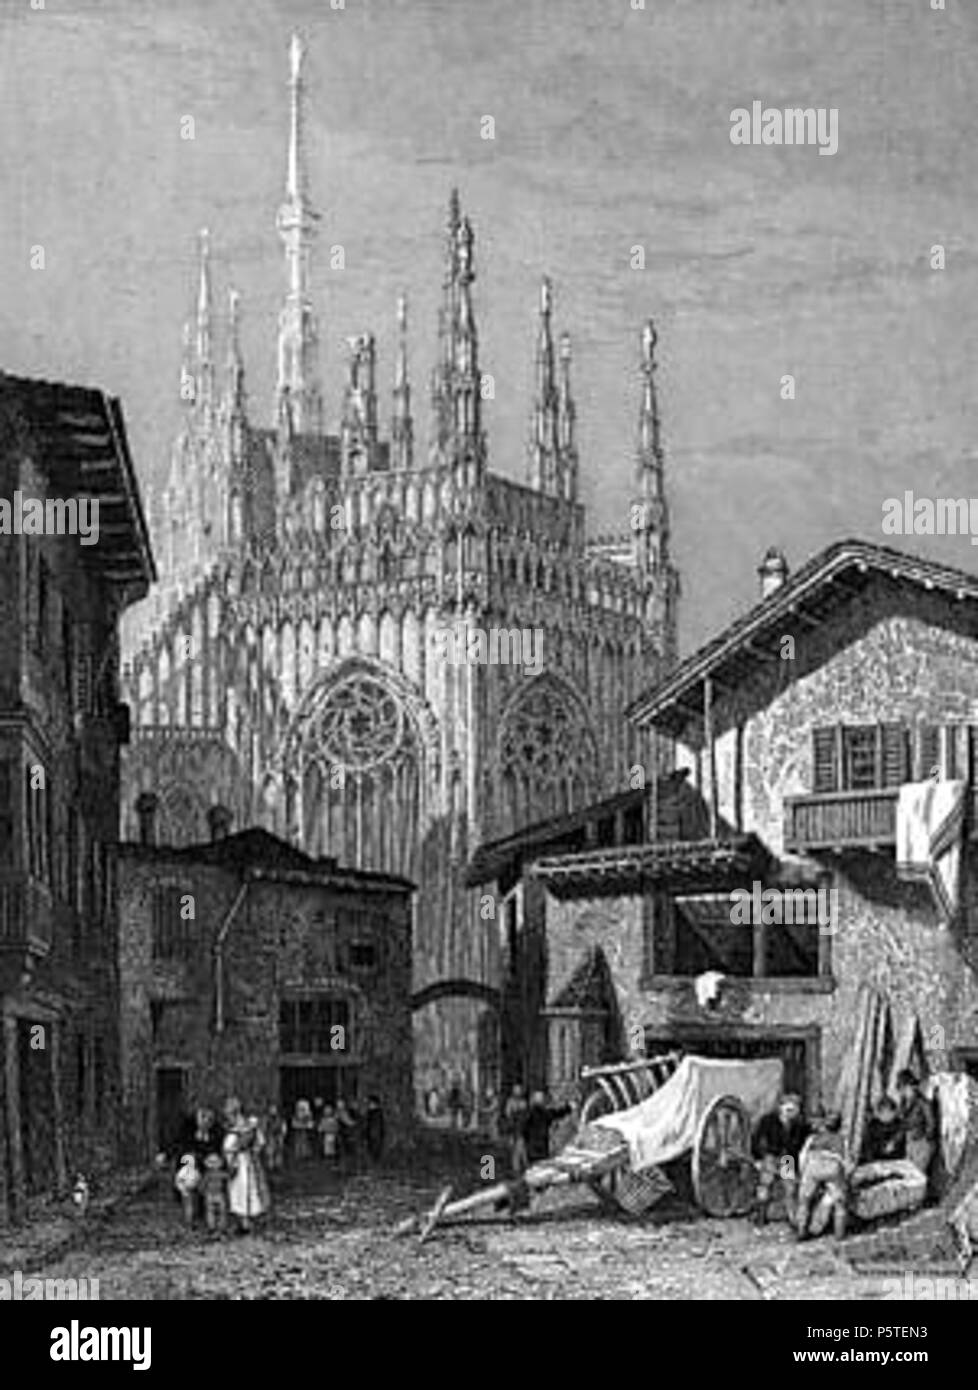 N/A.  Italiano: James Carter (incisore) - Abside del Duomo di Milano. Da un disegno di Clarkson Stanfield (1793-1867). Incisione edita in: Travelling sketches in North of Italy, the Tyrol and on the Rhine, 1832. English: James Carter (engraver) - Apse of the Cathedral in Milan, Italy. From a drawing by Clarkson Stanfield (1793-1867). . 1832.    After Clarkson Frederick Stanfield  (1793–1867)     Alternative names William Clarkson Stanfield  Description British painter  Date of birth/death 3 December 1793 18 May 1867  Location of birth/death Sunderland Hampstead  Work location UK  Authority con Stock Photo